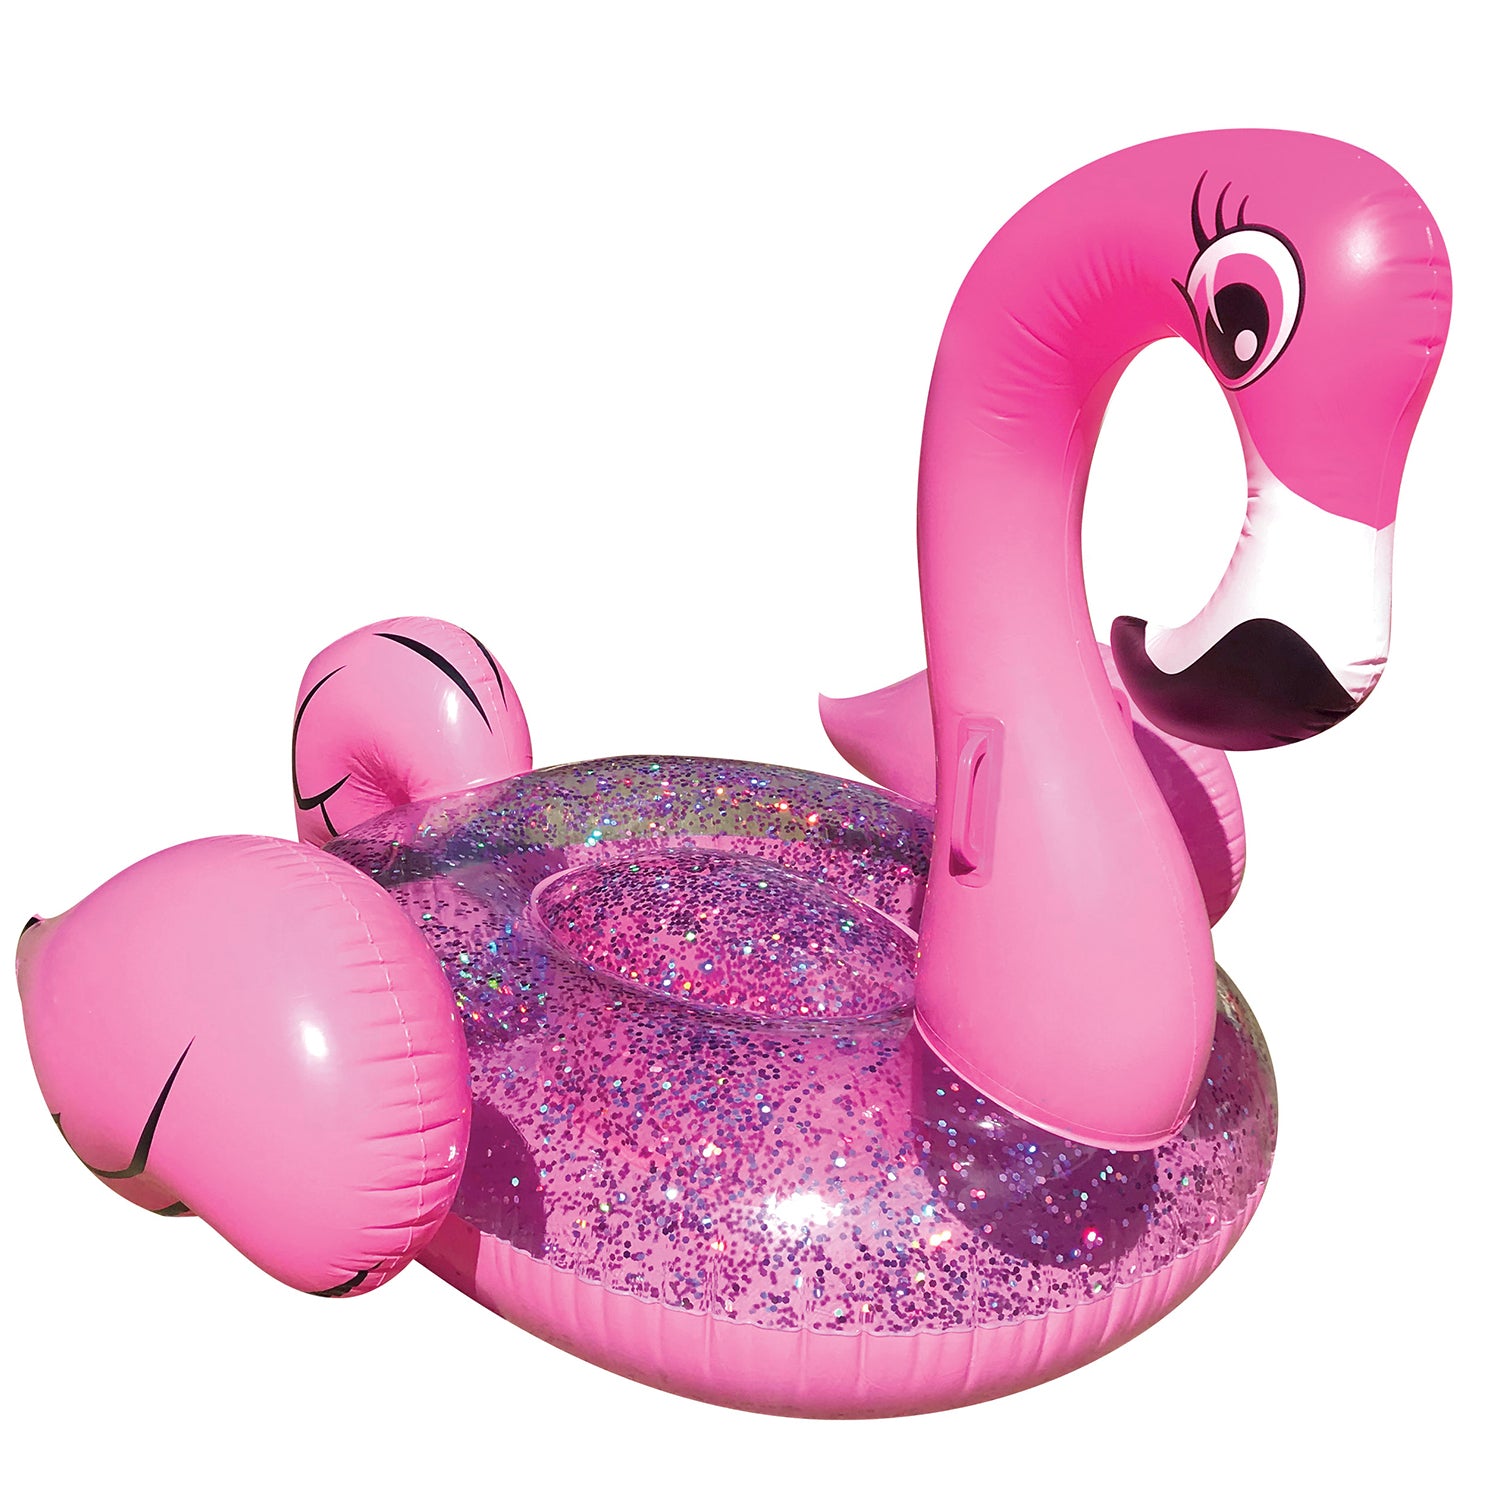 Palm Beach Bling Flamingo Inflateable Pool Toy - 751203048800